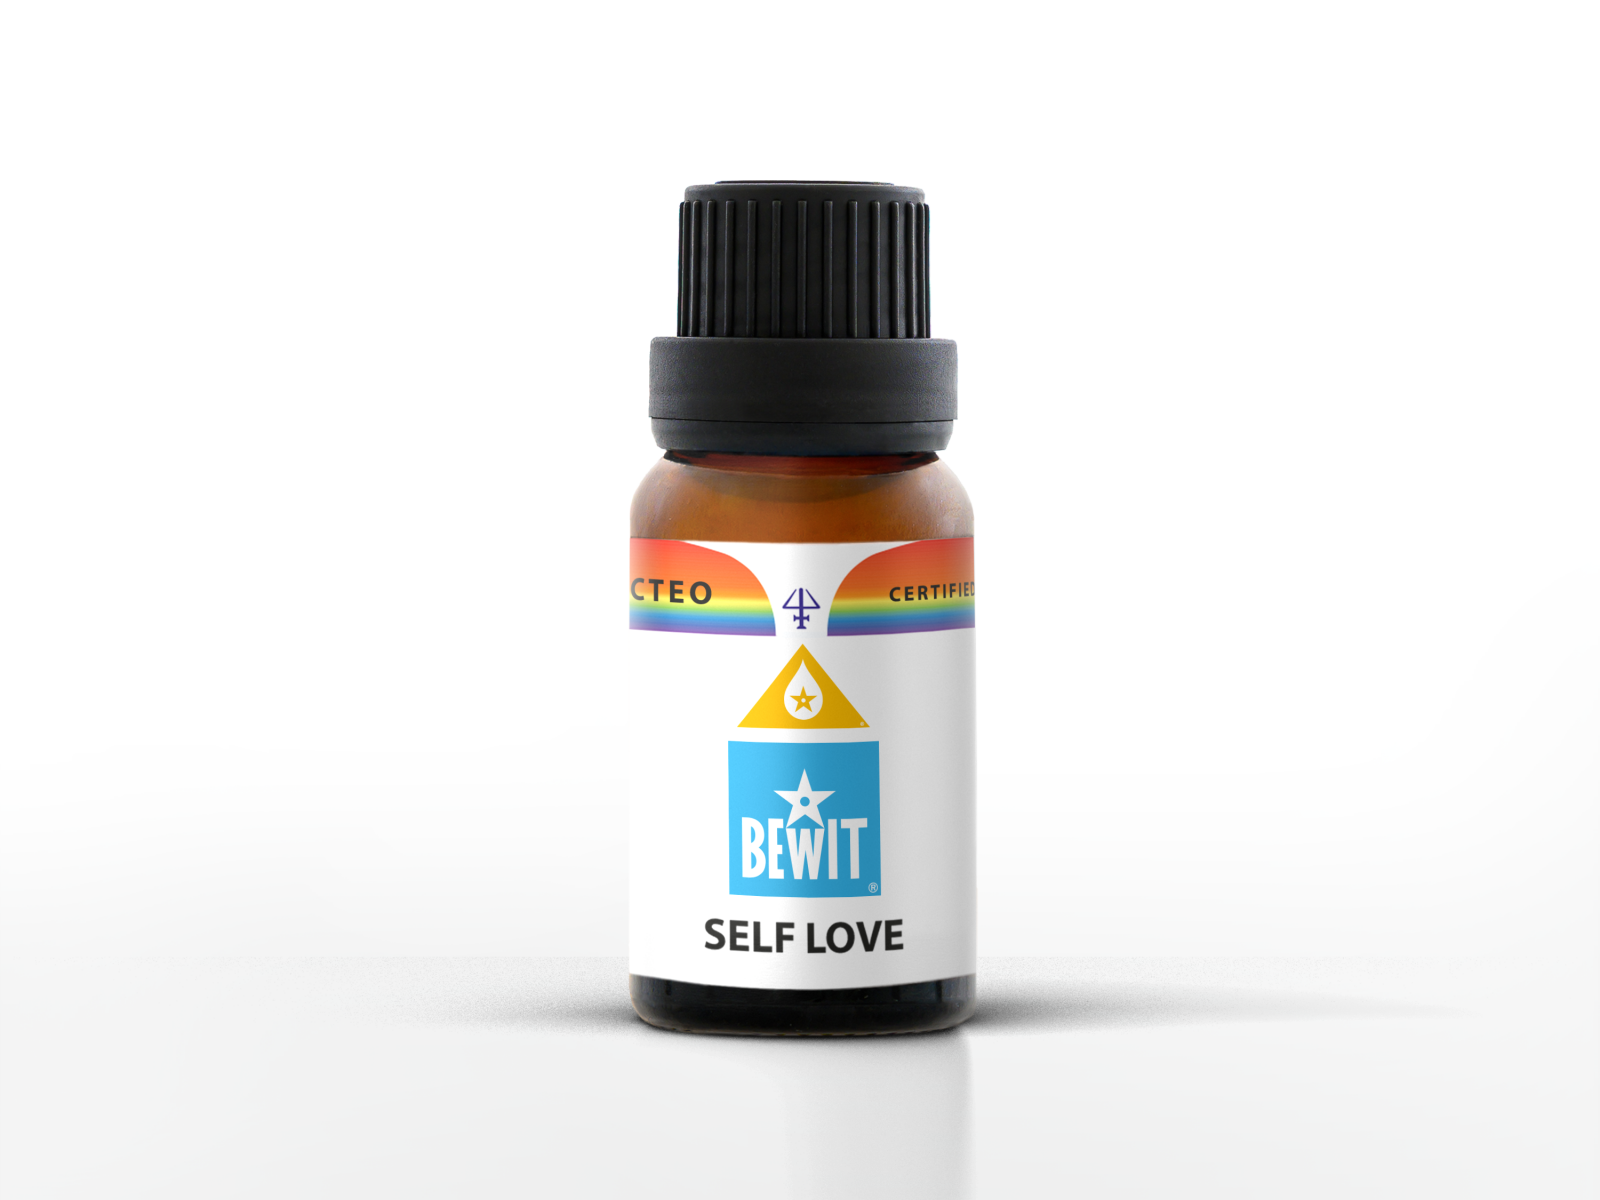 BEWIT SELF LOVE - 100% natural essential oil blend in CTEO® quality